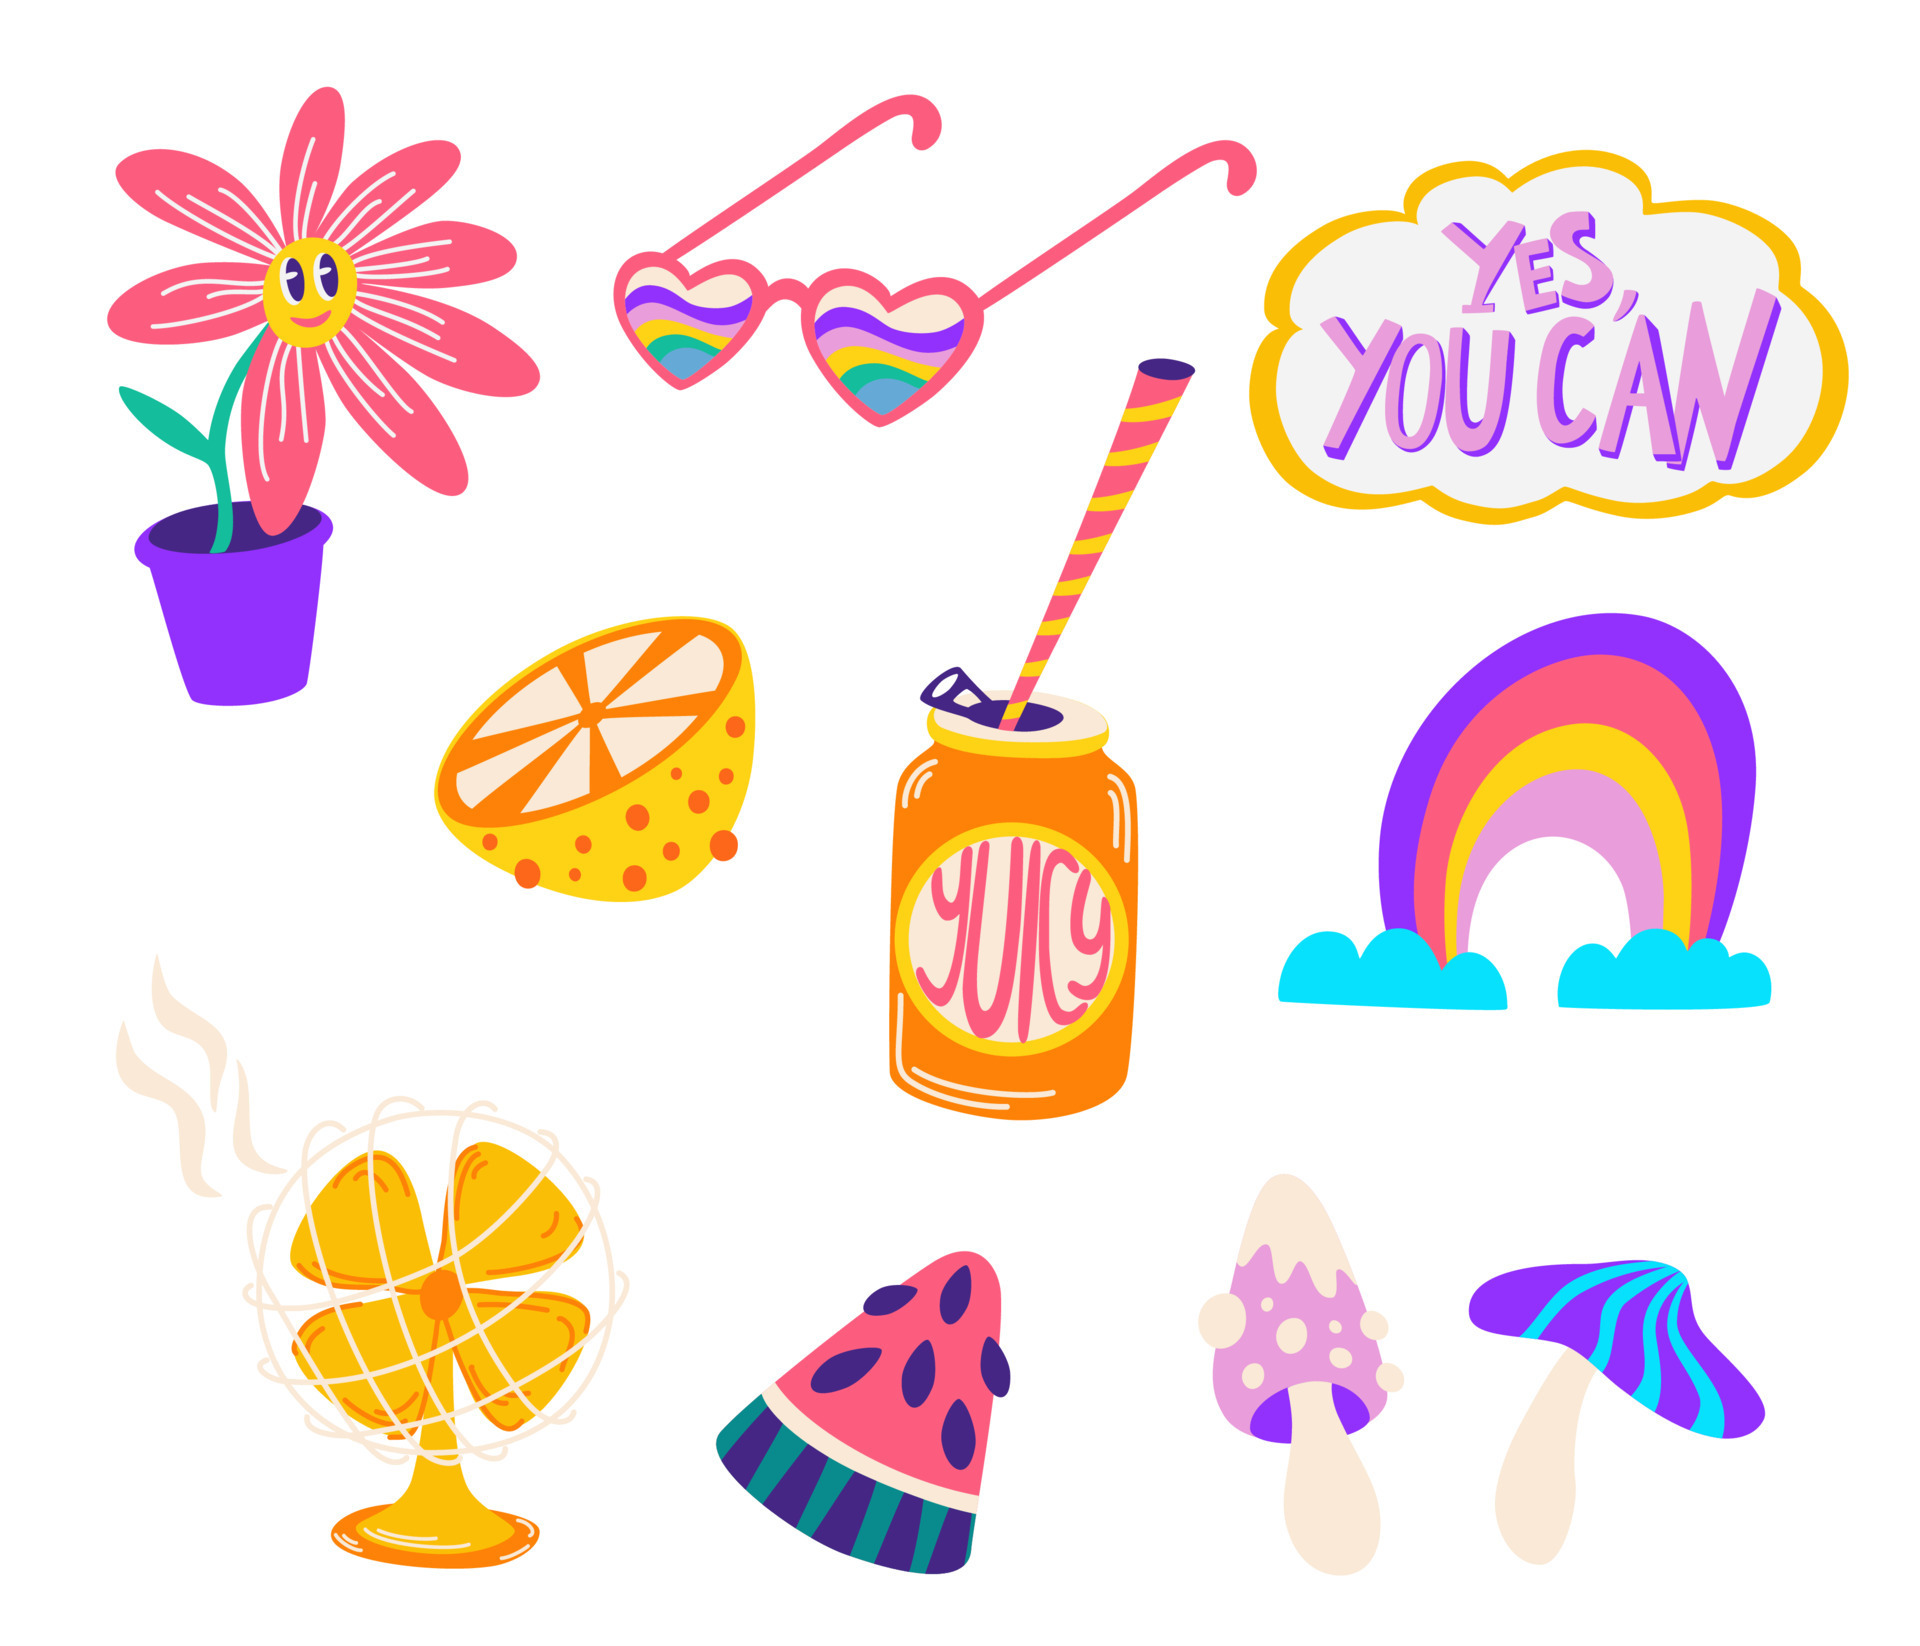 Set Of Fashion Stickers In 80s90s Comic Style Stock Illustration - Download  Image Now - Love - Emotion, Cartoon, Fashion - iStock